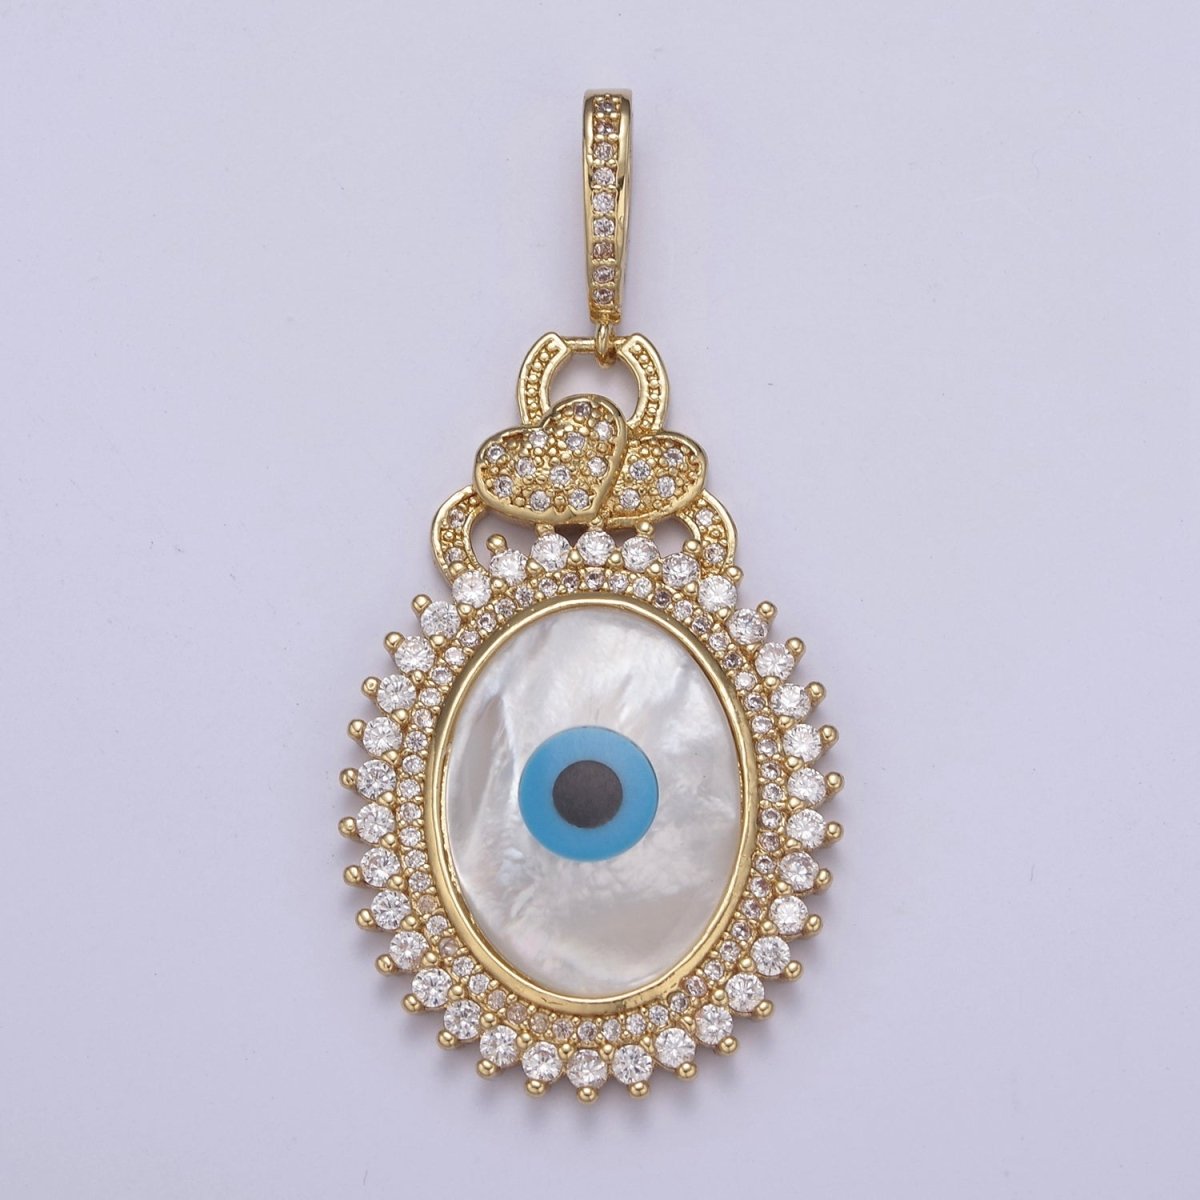 Bold 14K Gold Filled Evil Eye Pendant With Shell Pearl Encrusted with Clear Cubic Zirconia CZ Talisman Amulet Pendant For Statement Jewelry Necklace Making H-830 - DLUXCA